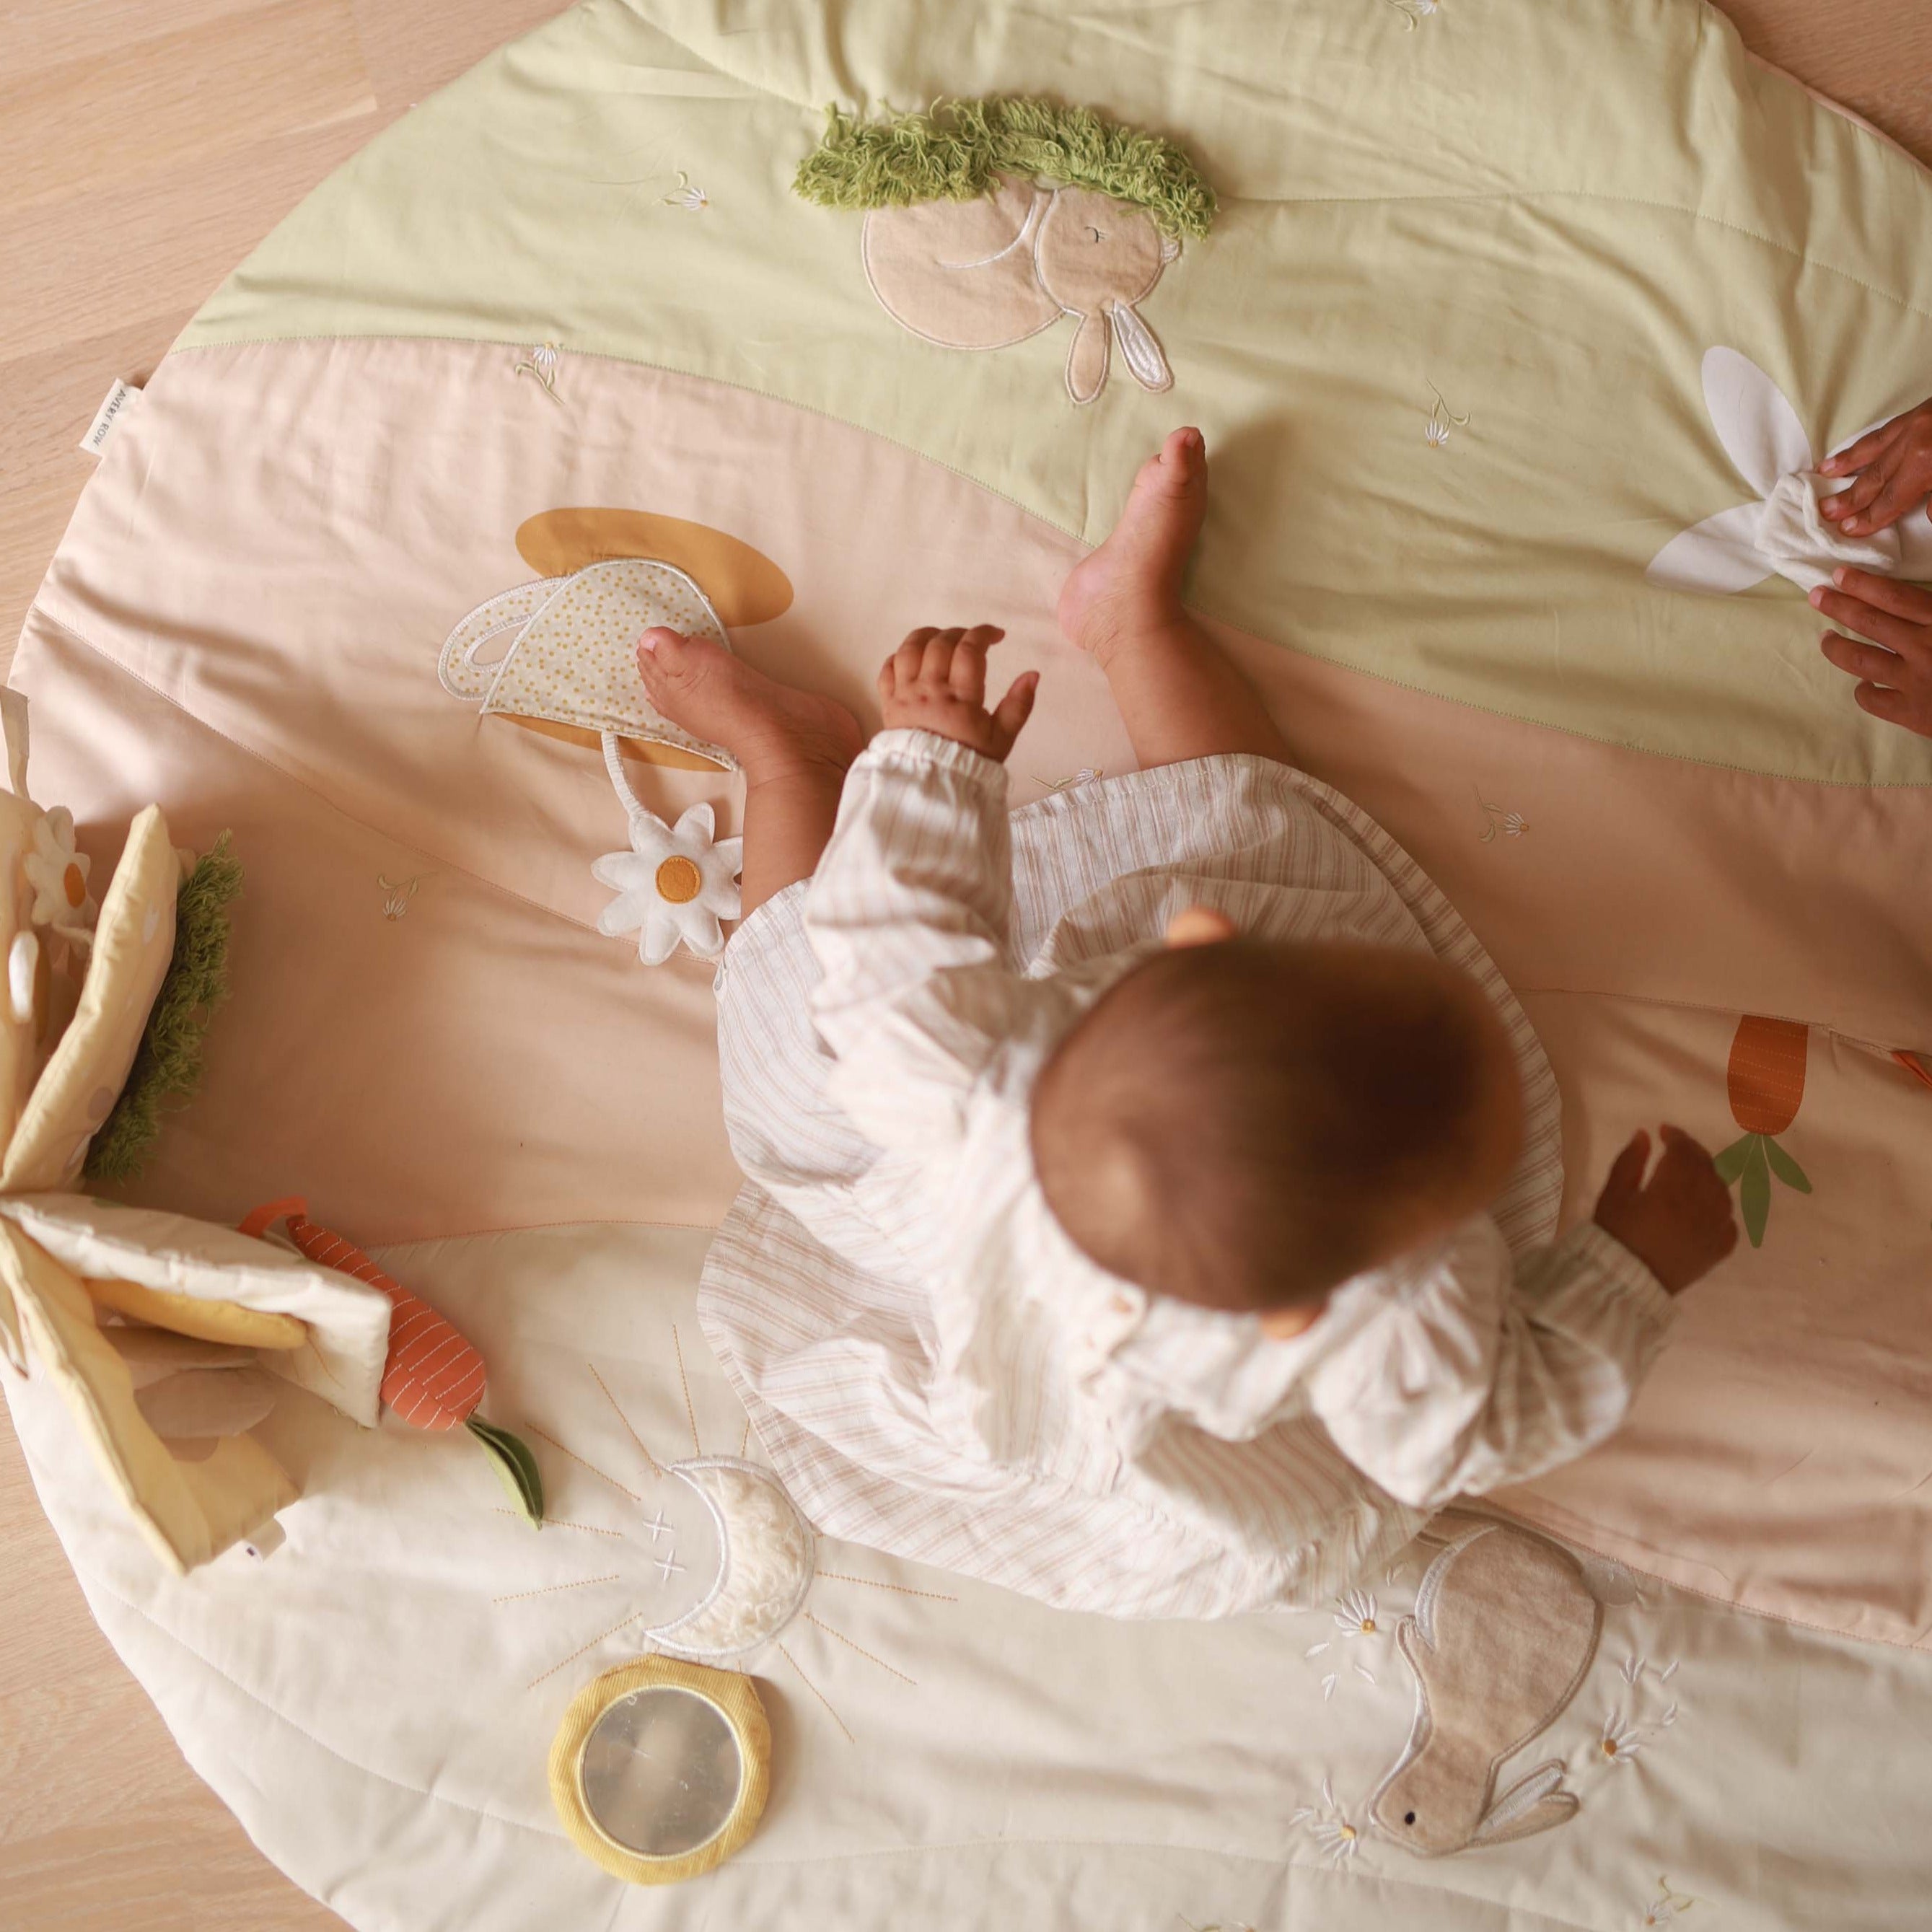 A baby playing on activity mat chamomile